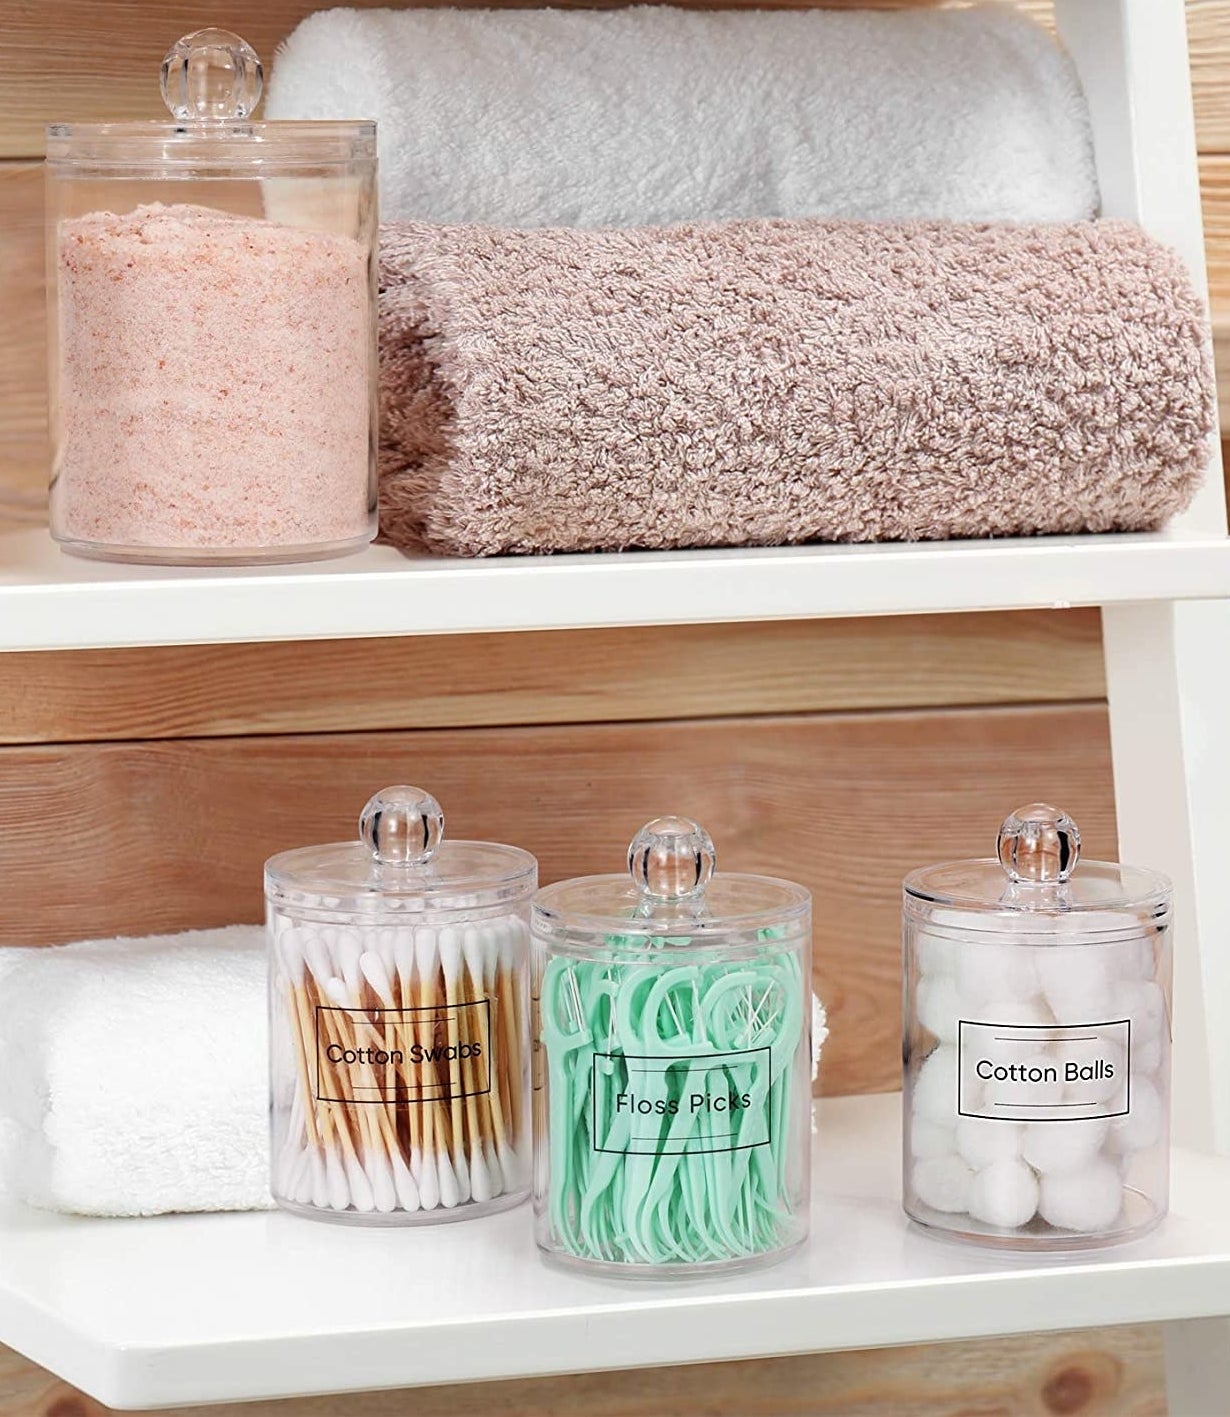 the jars filled with things on a ladder shelf in a bathroom